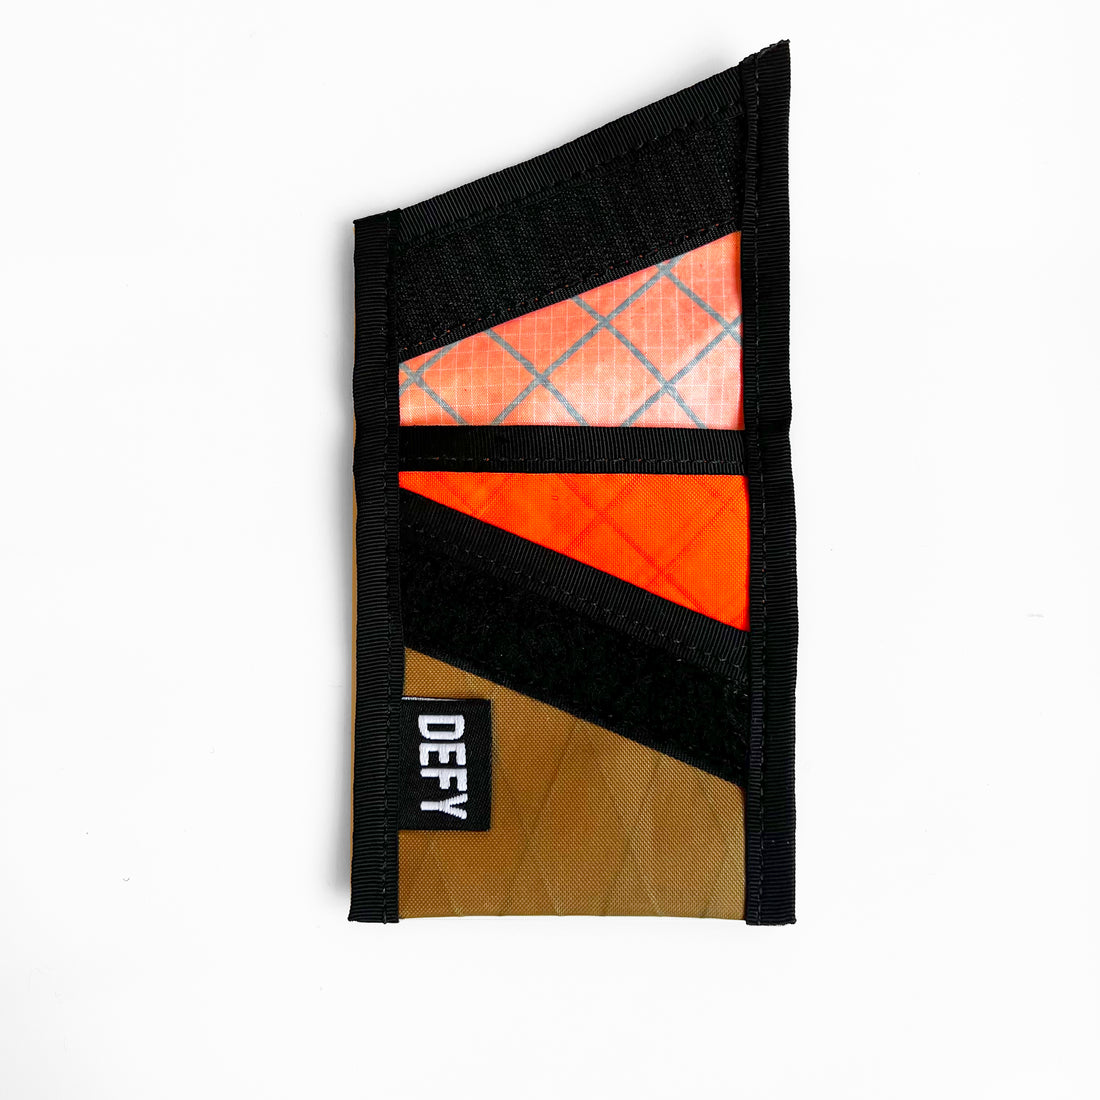 The Thing | 'Fire Edition' ECOPAK™ EPX Blaze Orange x Coyote X-Pac™ Front Pocket Wallet | Limited